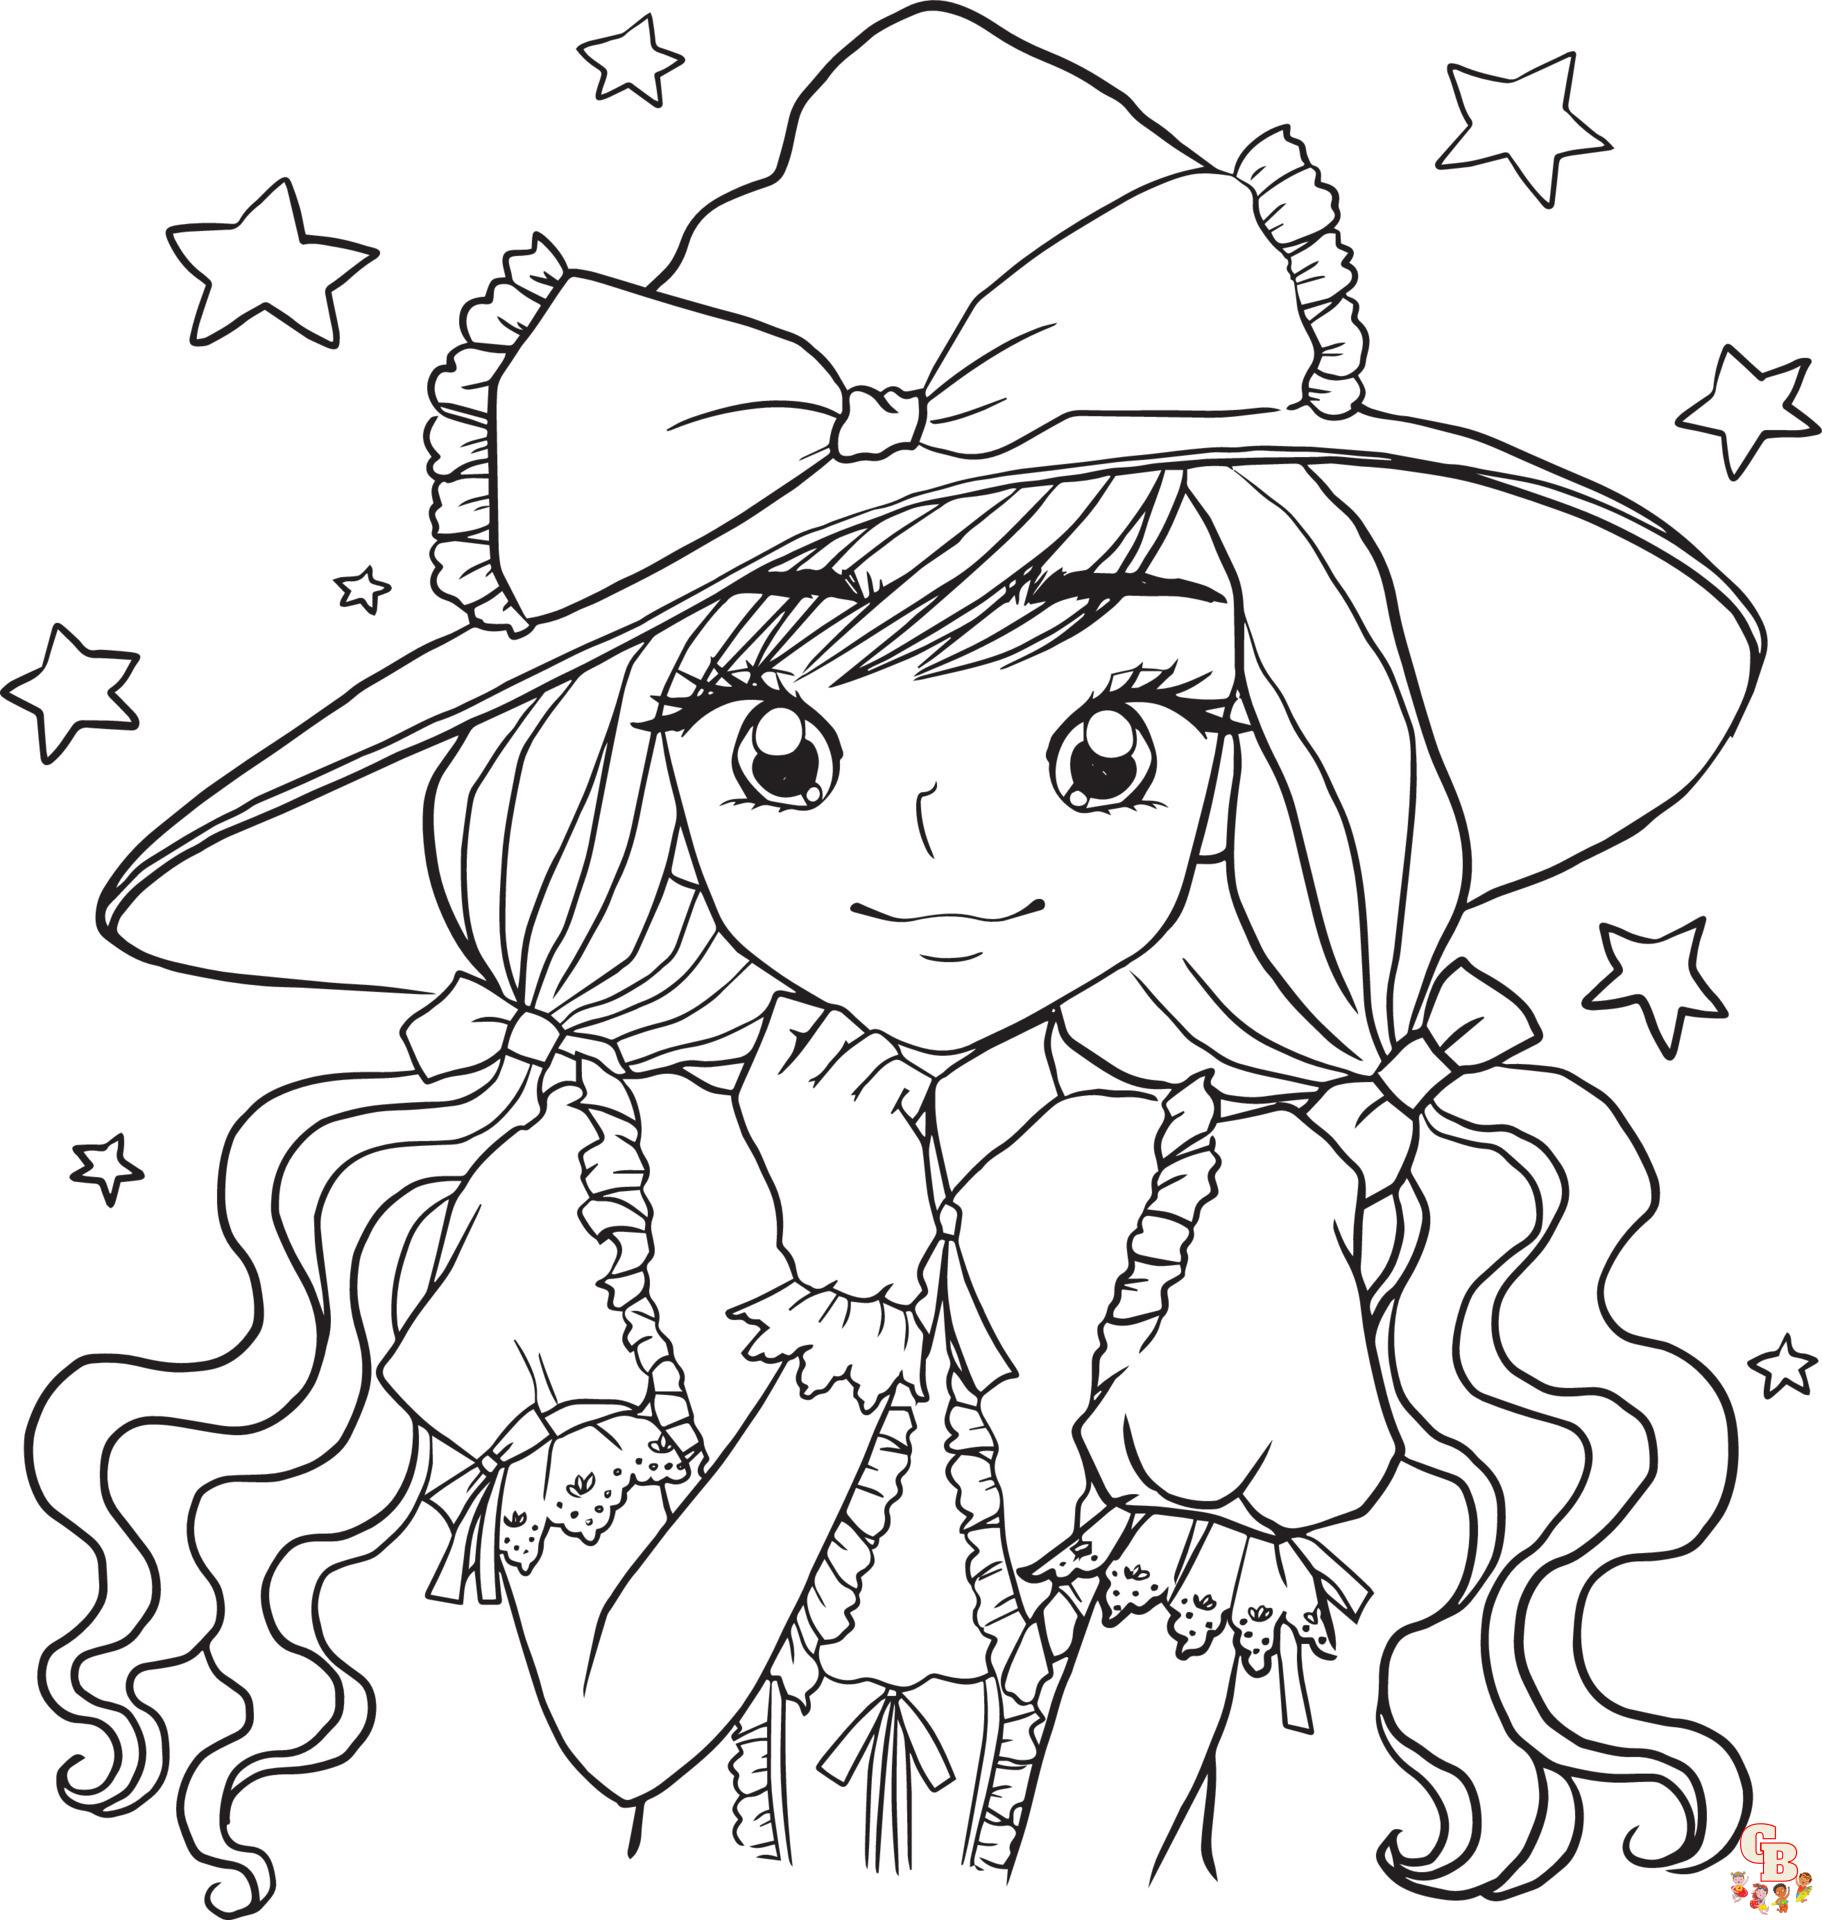 Get This Beautiful Anime Girl Coloring Pages to Print wn15 !